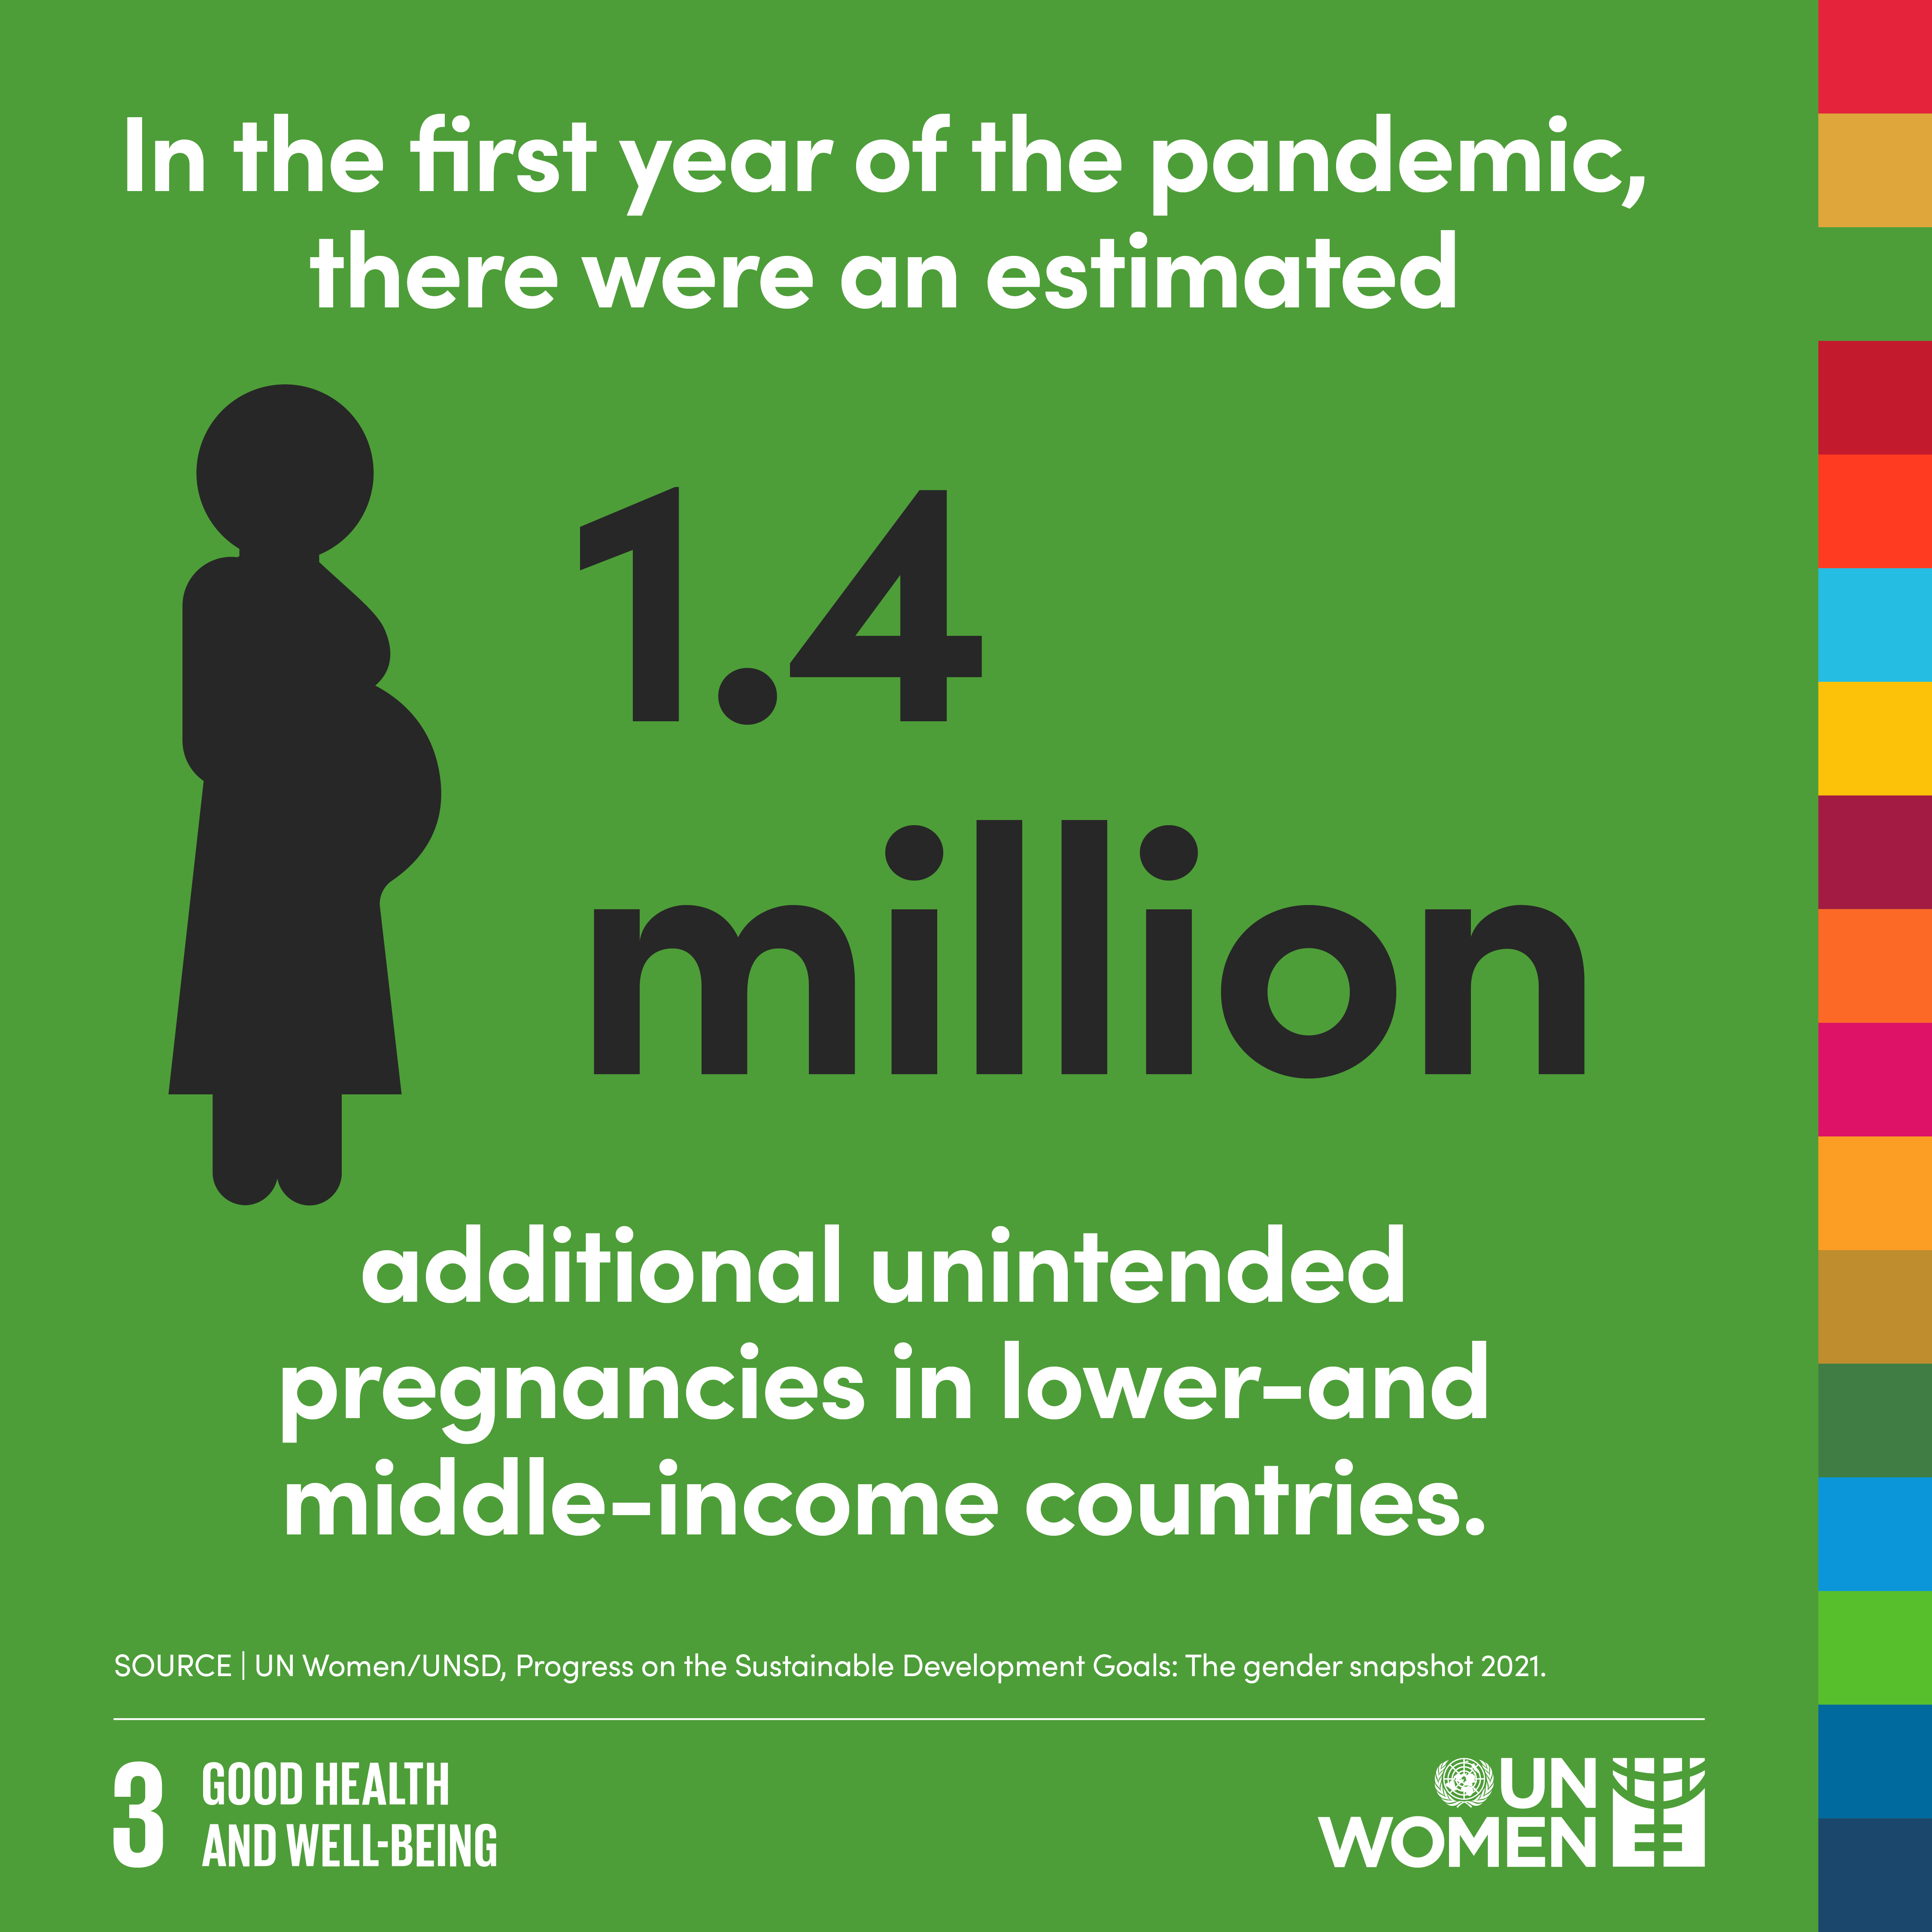 In the first year of the pandemic, there were an estimated additional 1.4 million additional unintended pregnancies in lower- and middle-income countries. 